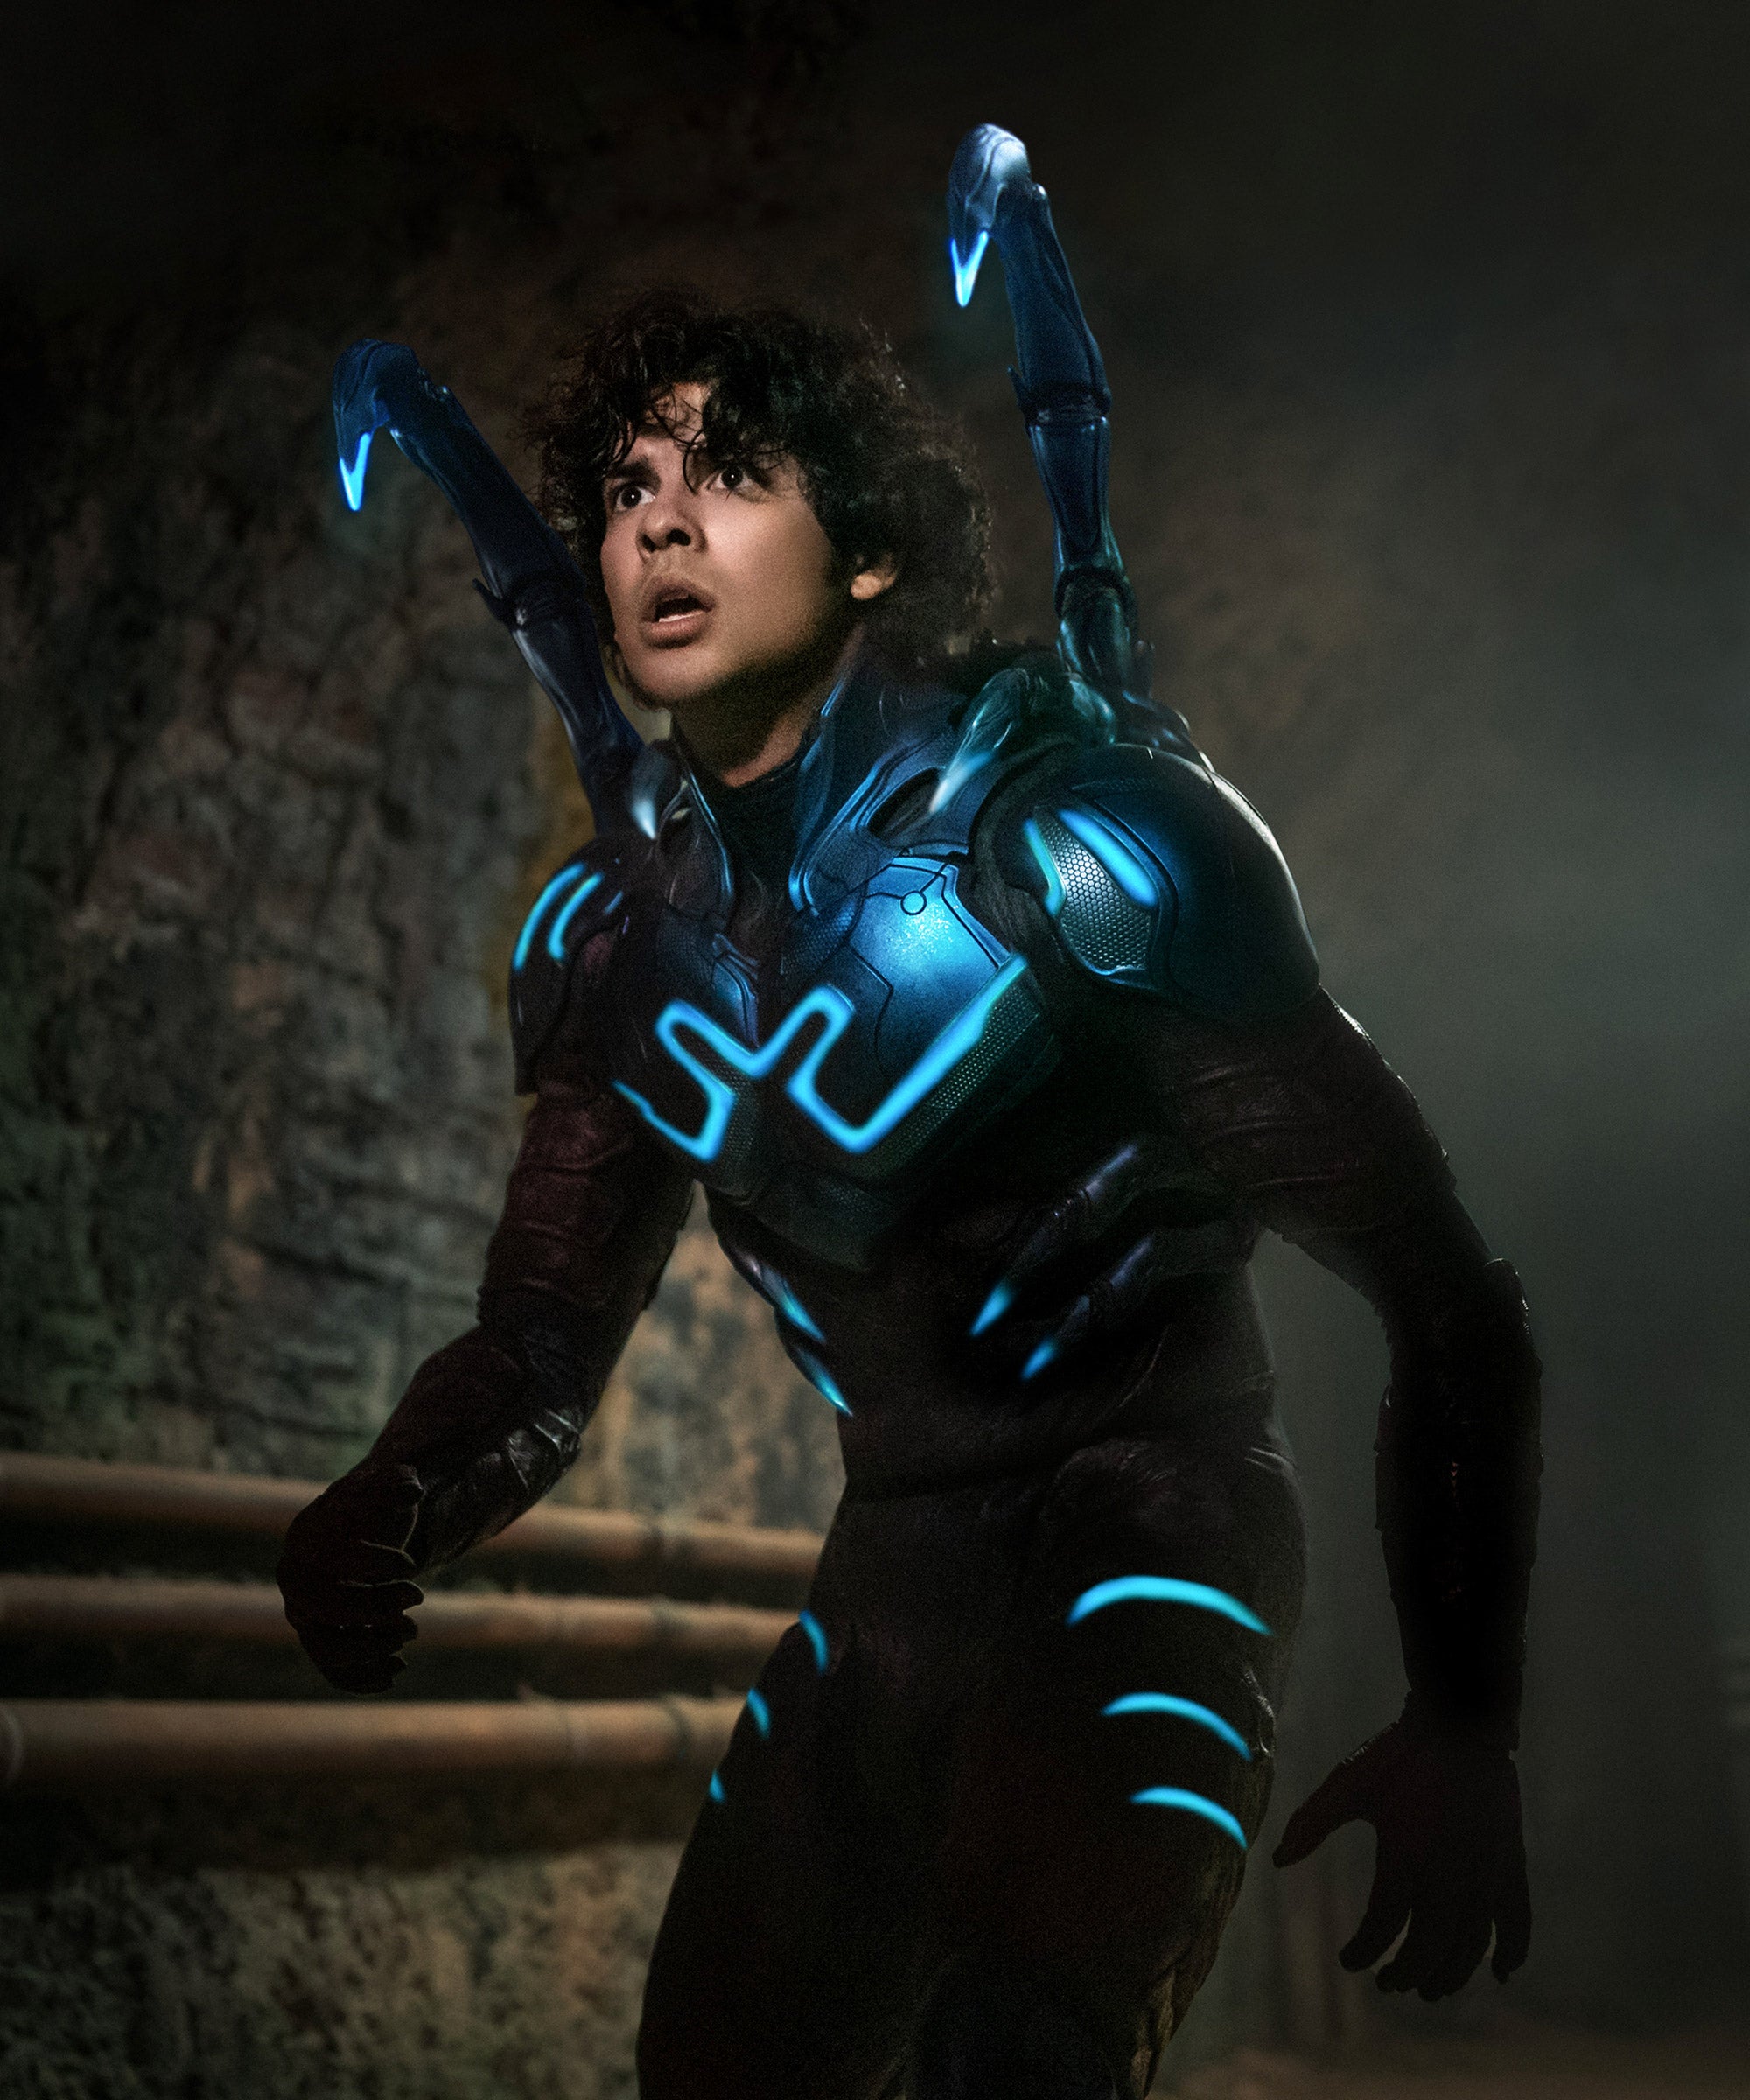 Blue beetle: Who is 'Blue Beetle'? Know how DC Studio makes Latino